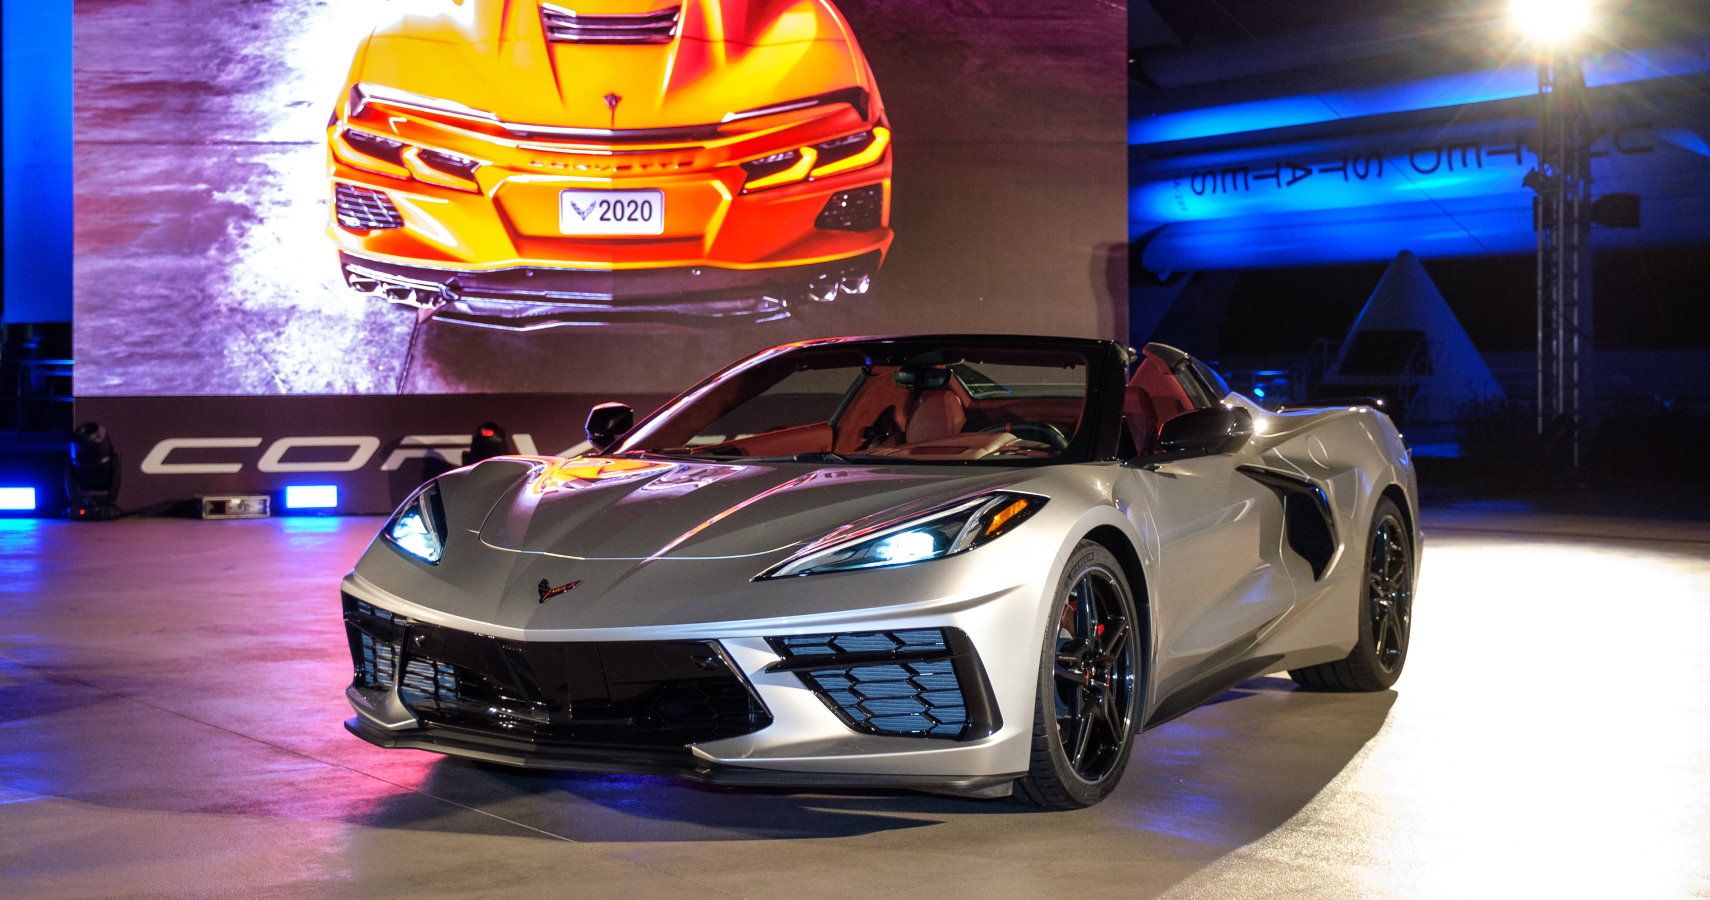 The 2020 Corvette Stingray hardtop convertible is unveiled Wednesday, October 2, 2019 at the Kennedy Space Center in Cape Canaveral, Florida. The Corvette Stingray convertible is the first hardtop and mid-engine convertible in Corvette history. The hardtop convertible offers the same storage as the Corvette Stingray coupe, even with the top down. The convertible will be priced only $7,500 (U.S.) more than the entry 1LT Stingray coupe. (Photo by Steve Fecht for Chevrolet)